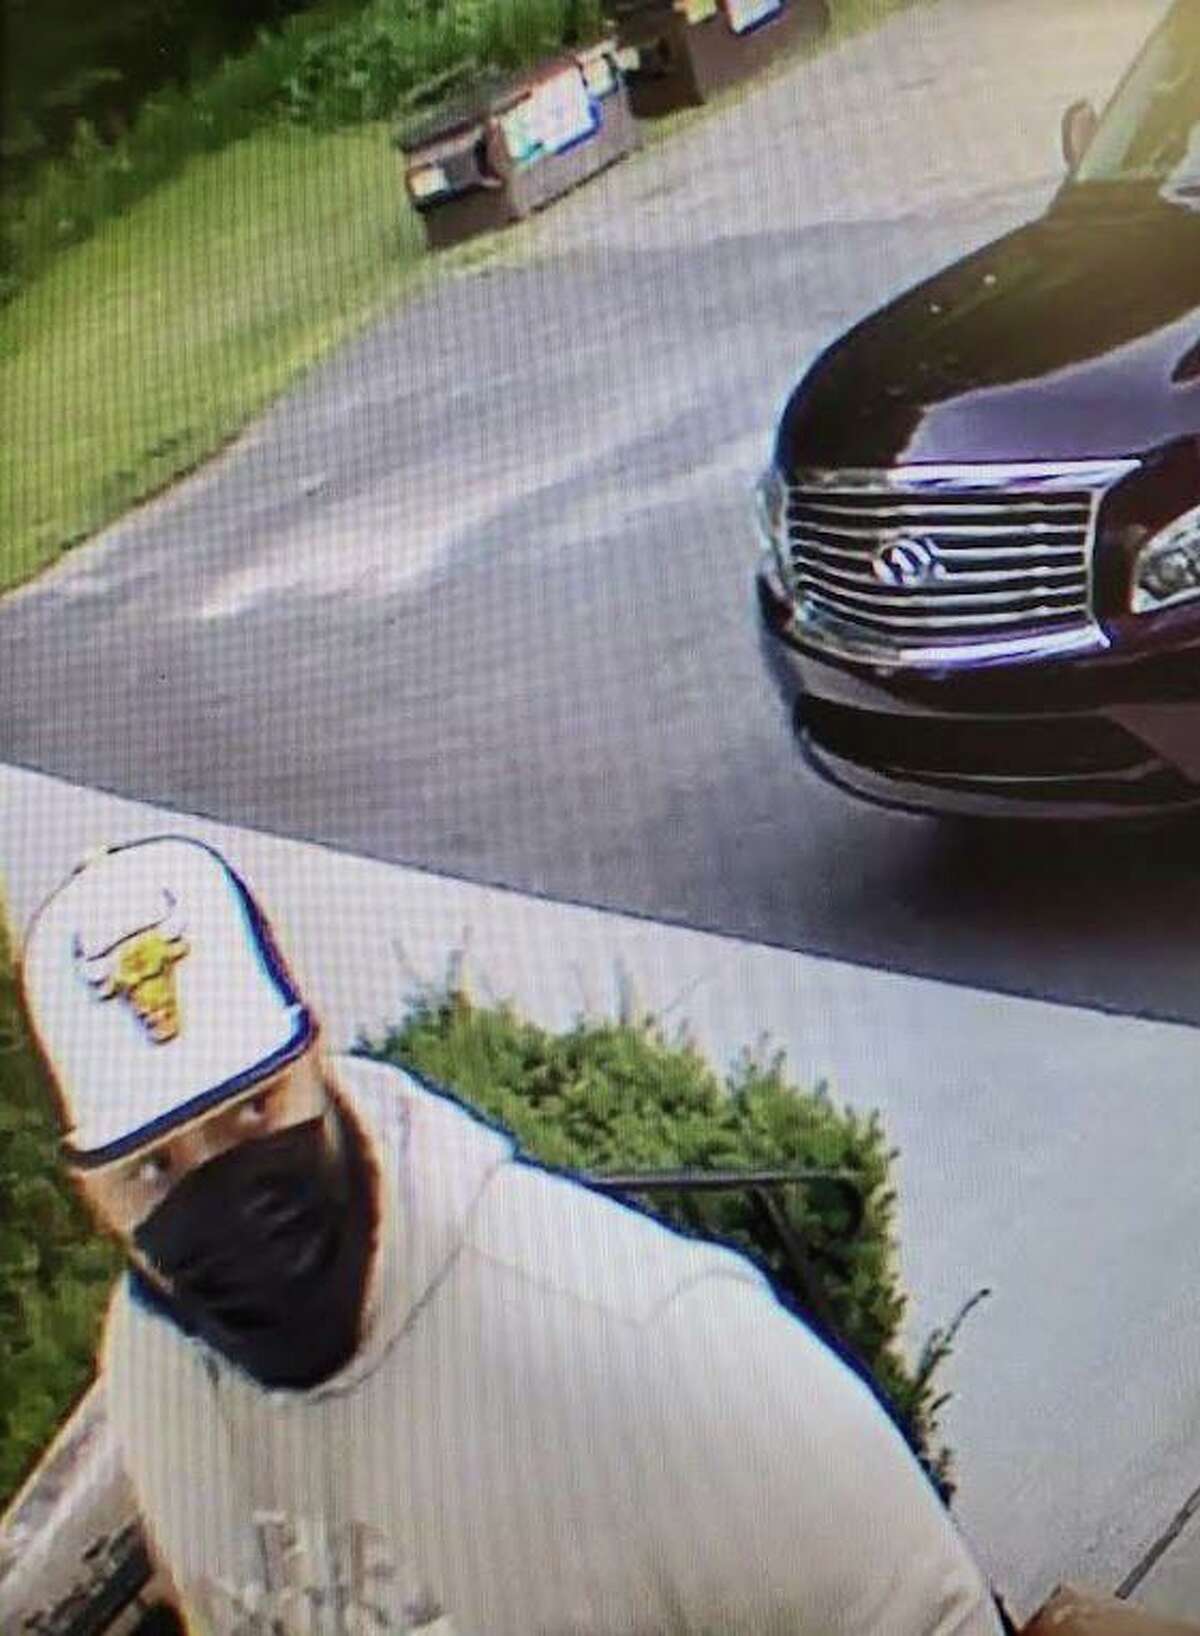 New Milford police are trying to identify this man, who they say is a person of interest in a burglary investigation.